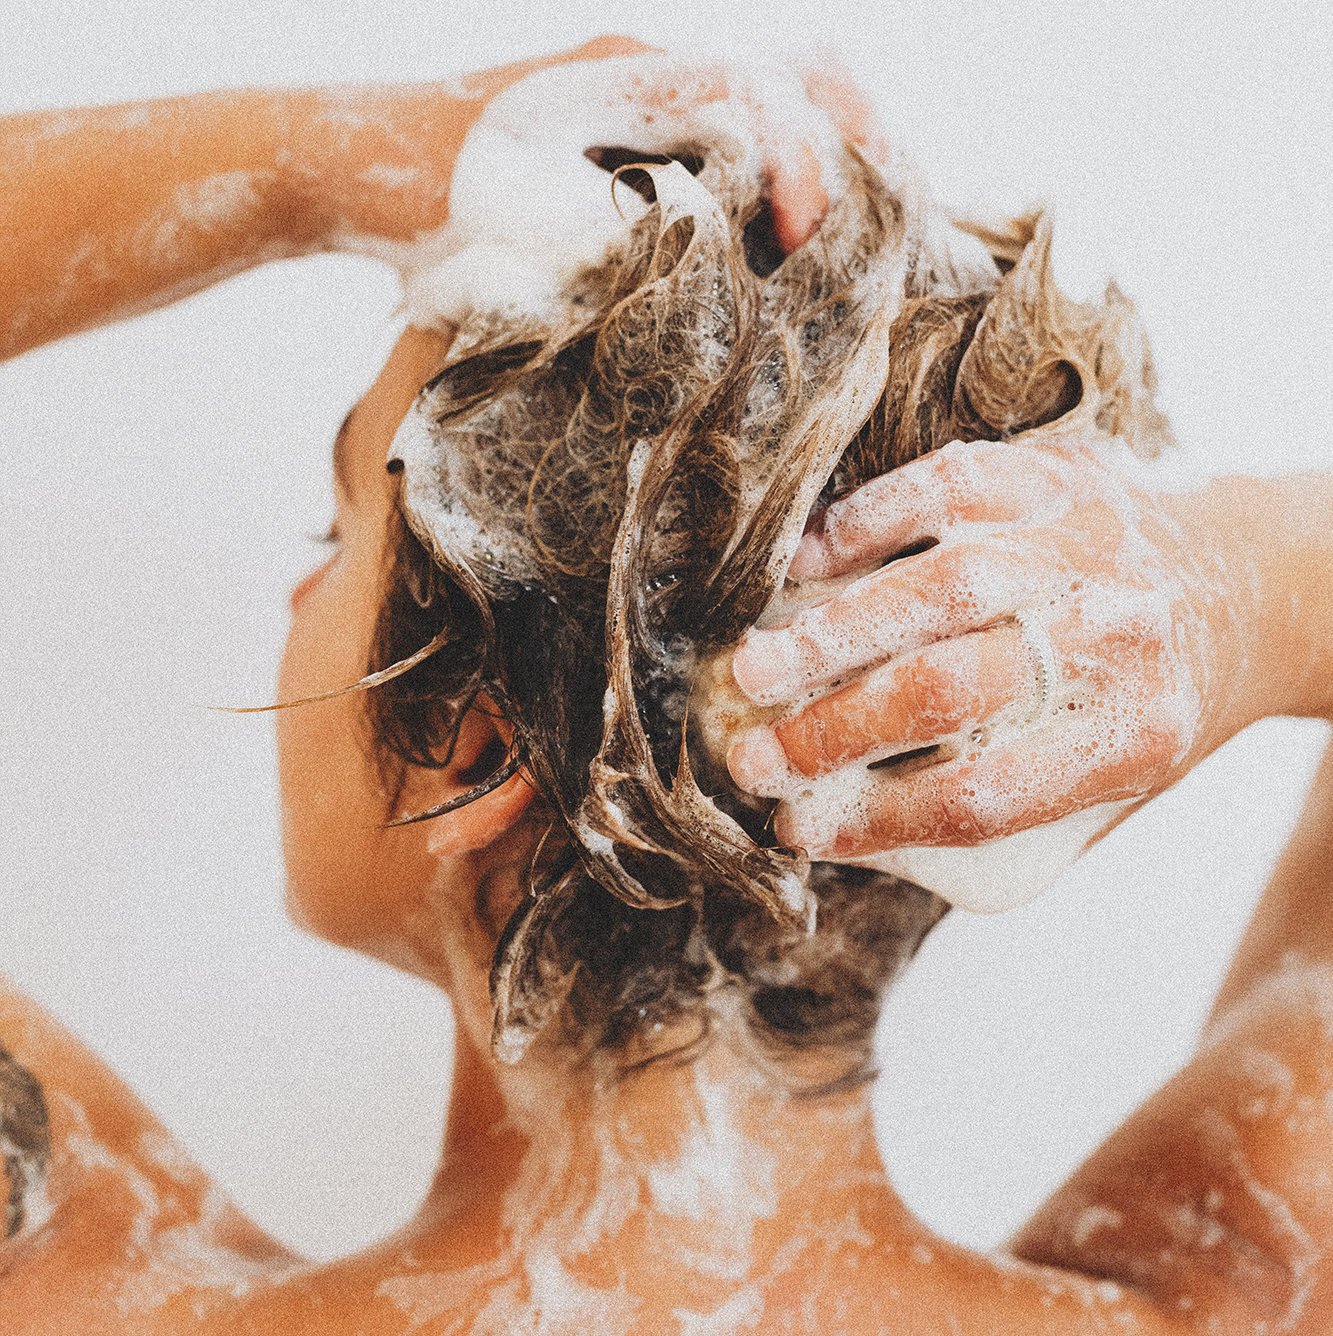 Got a Dry, Itchy Scalp? Check Out These Shampoos Rn